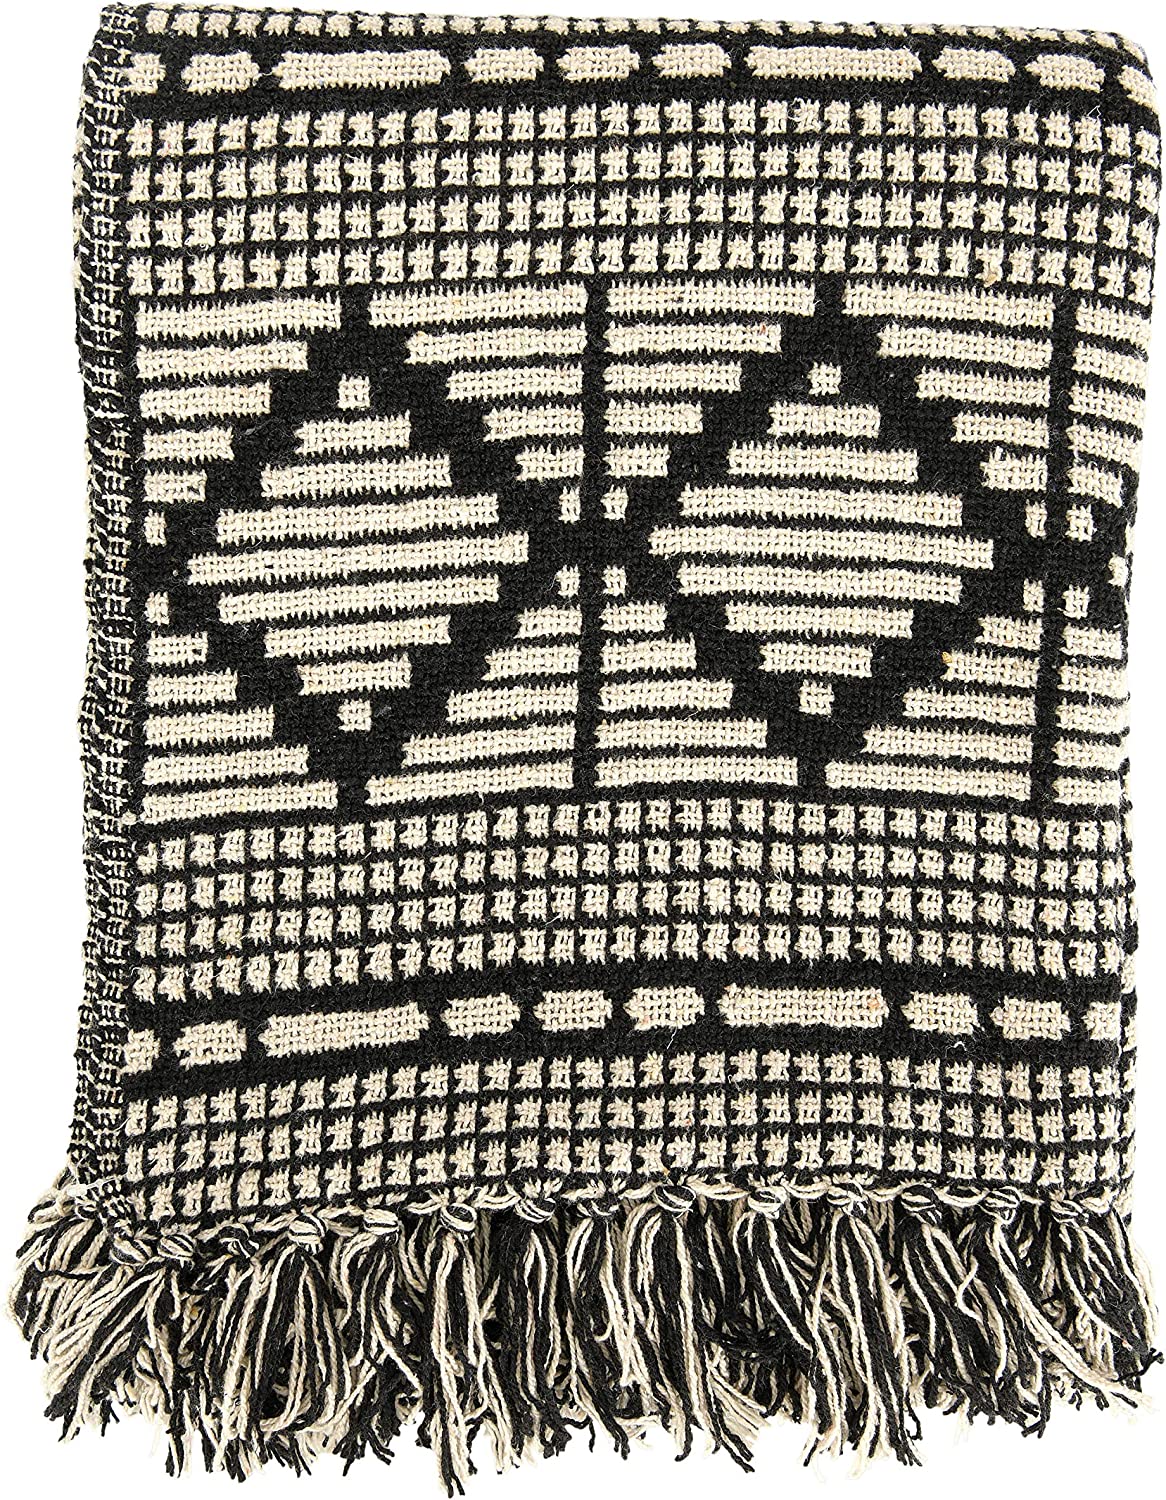 Black and Beige Woven Cotton Blend Throw Blanket with Fringe